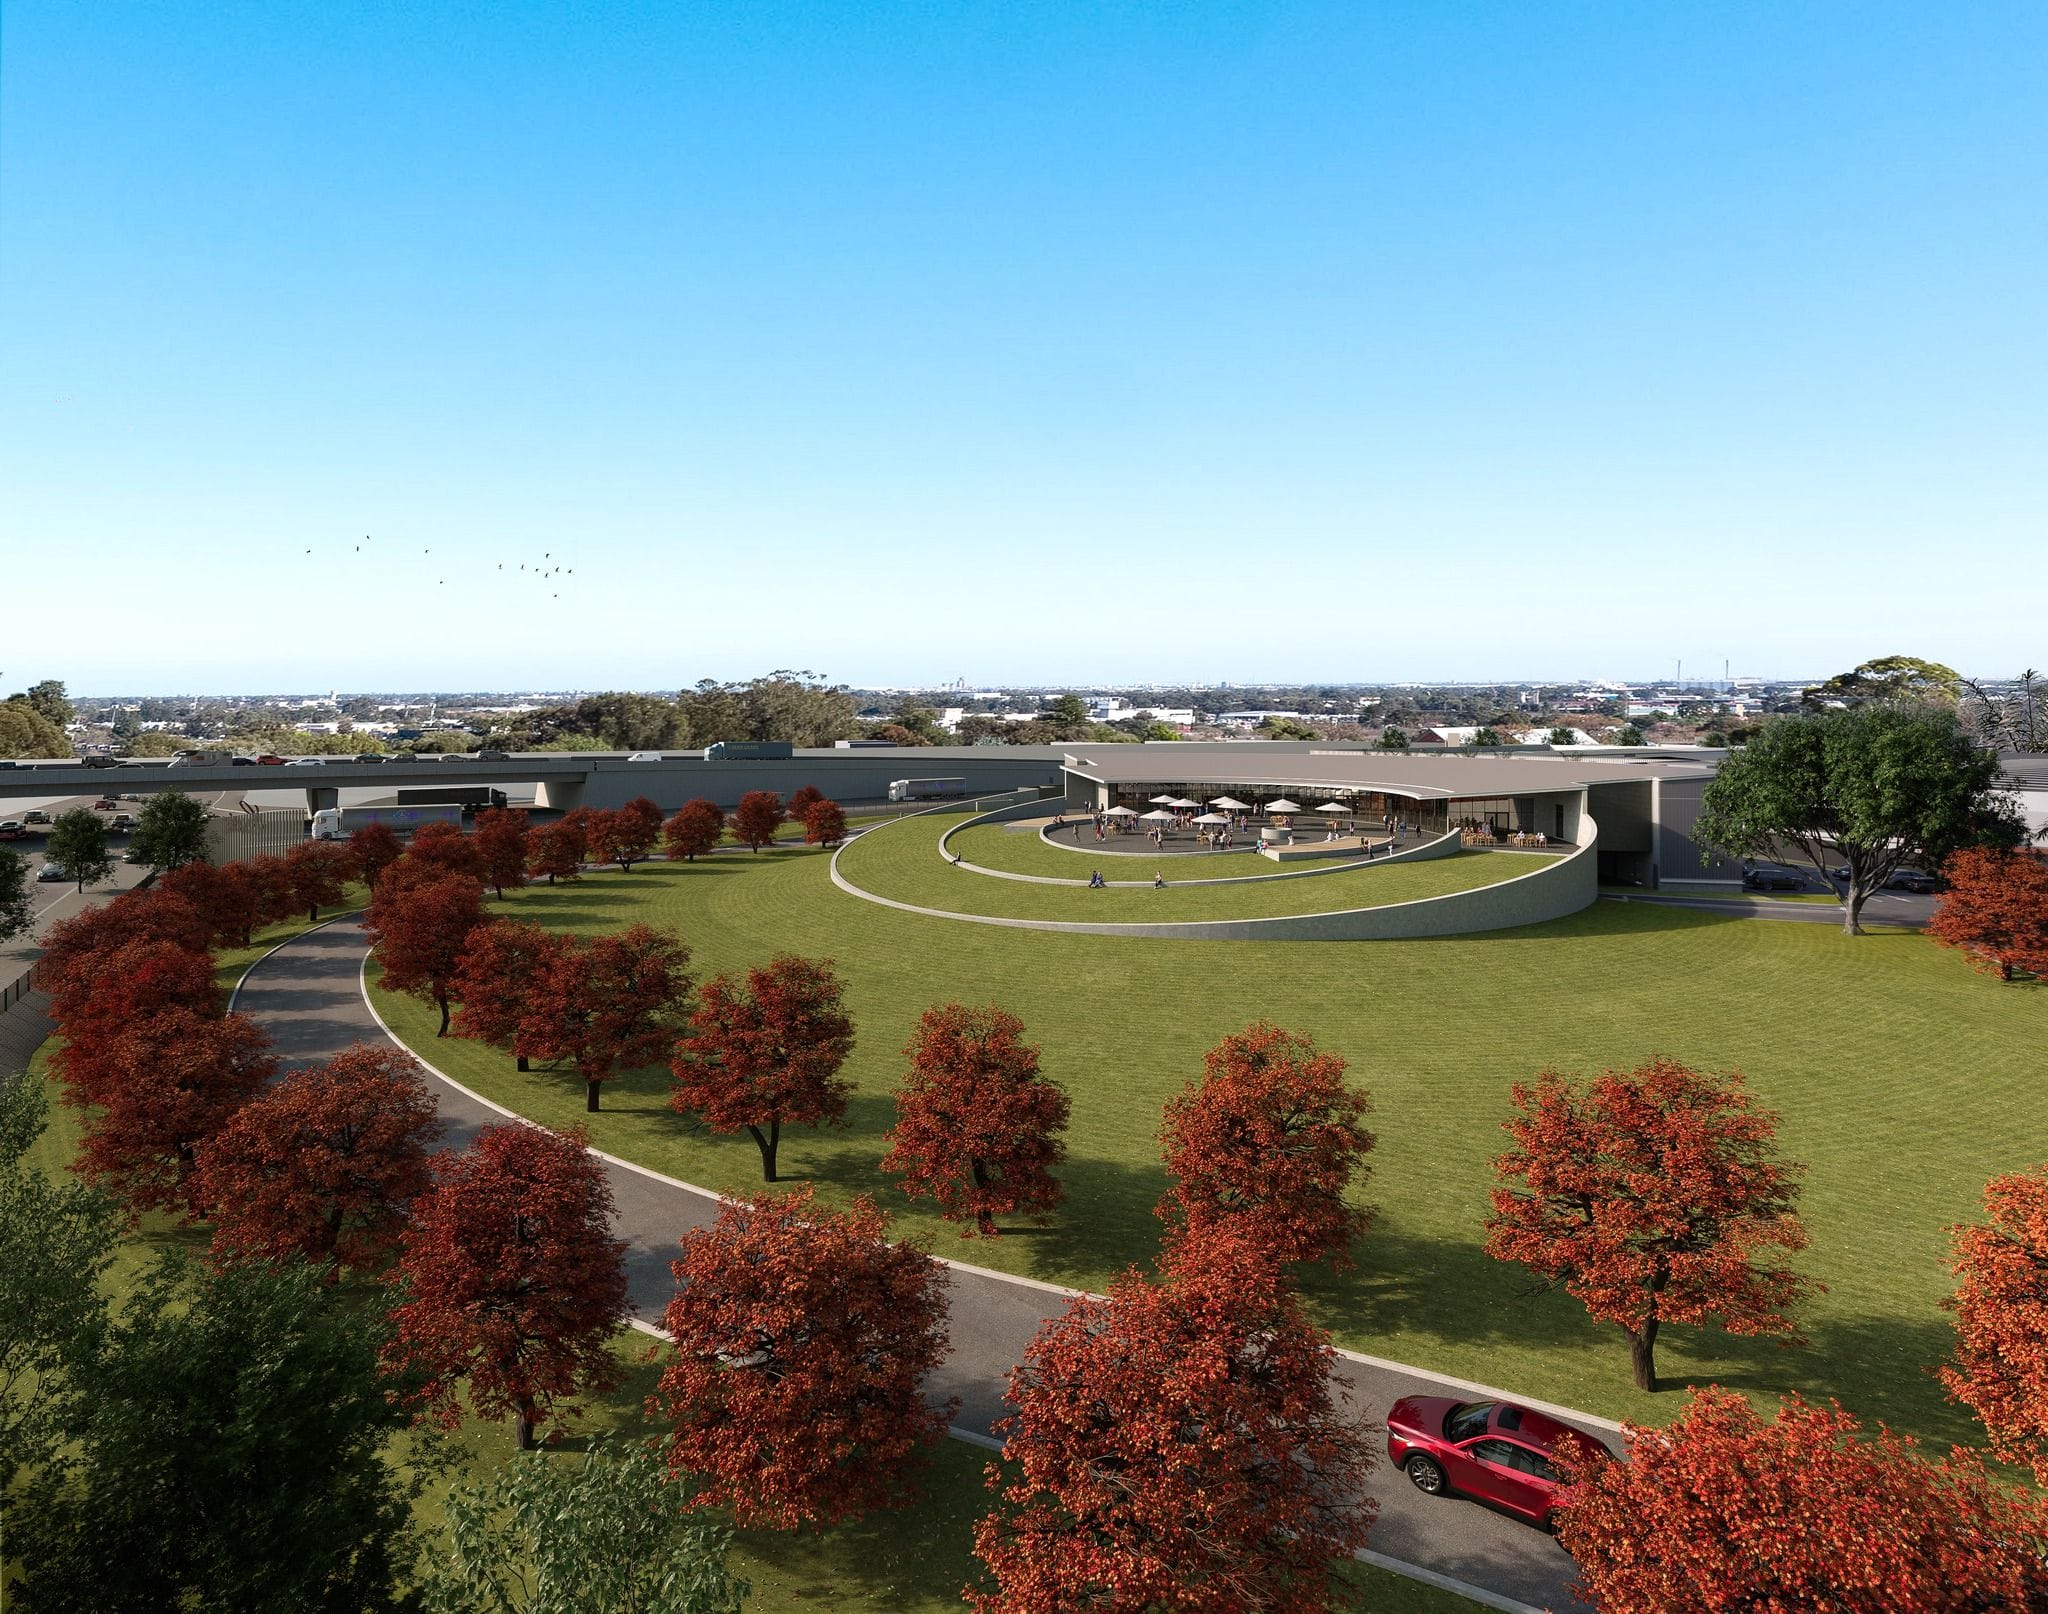 A render of the new Coopers facility in Adelaide